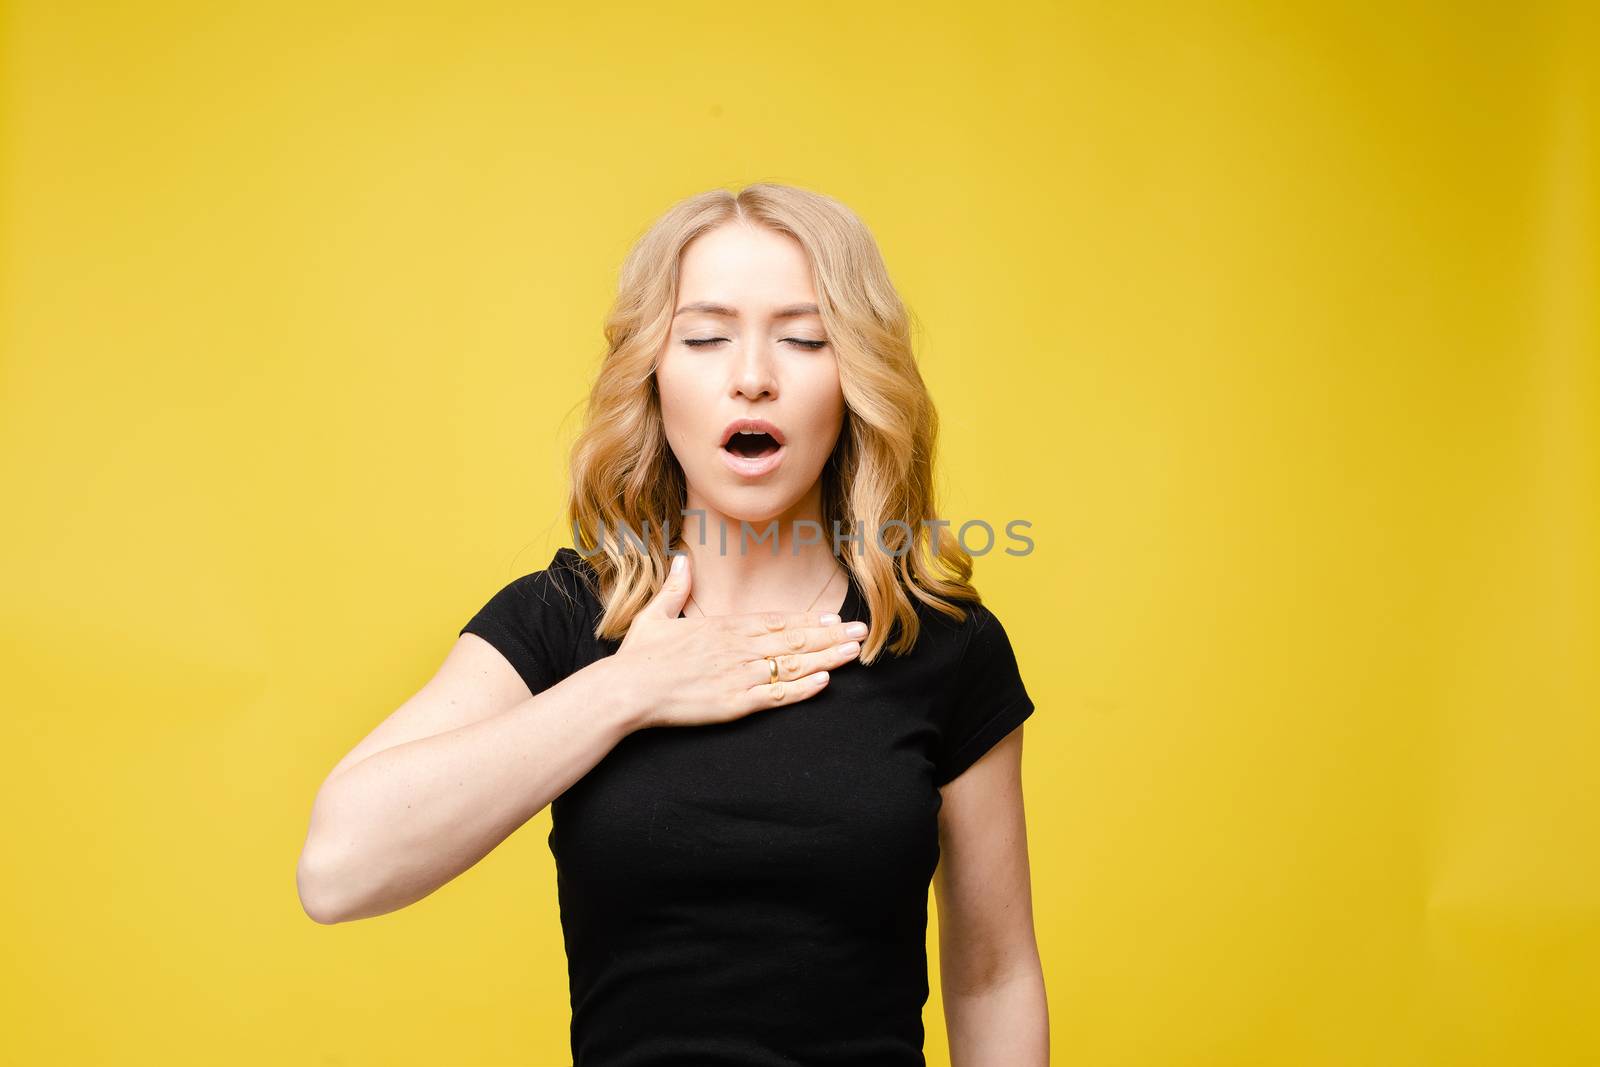 Stock photo of a blonde Caucasian woman in black t-shirt holding hand on chest demonstrating problem with breathing. Asthma attack, respiratory problem, sore throat. Isolate on yellow.